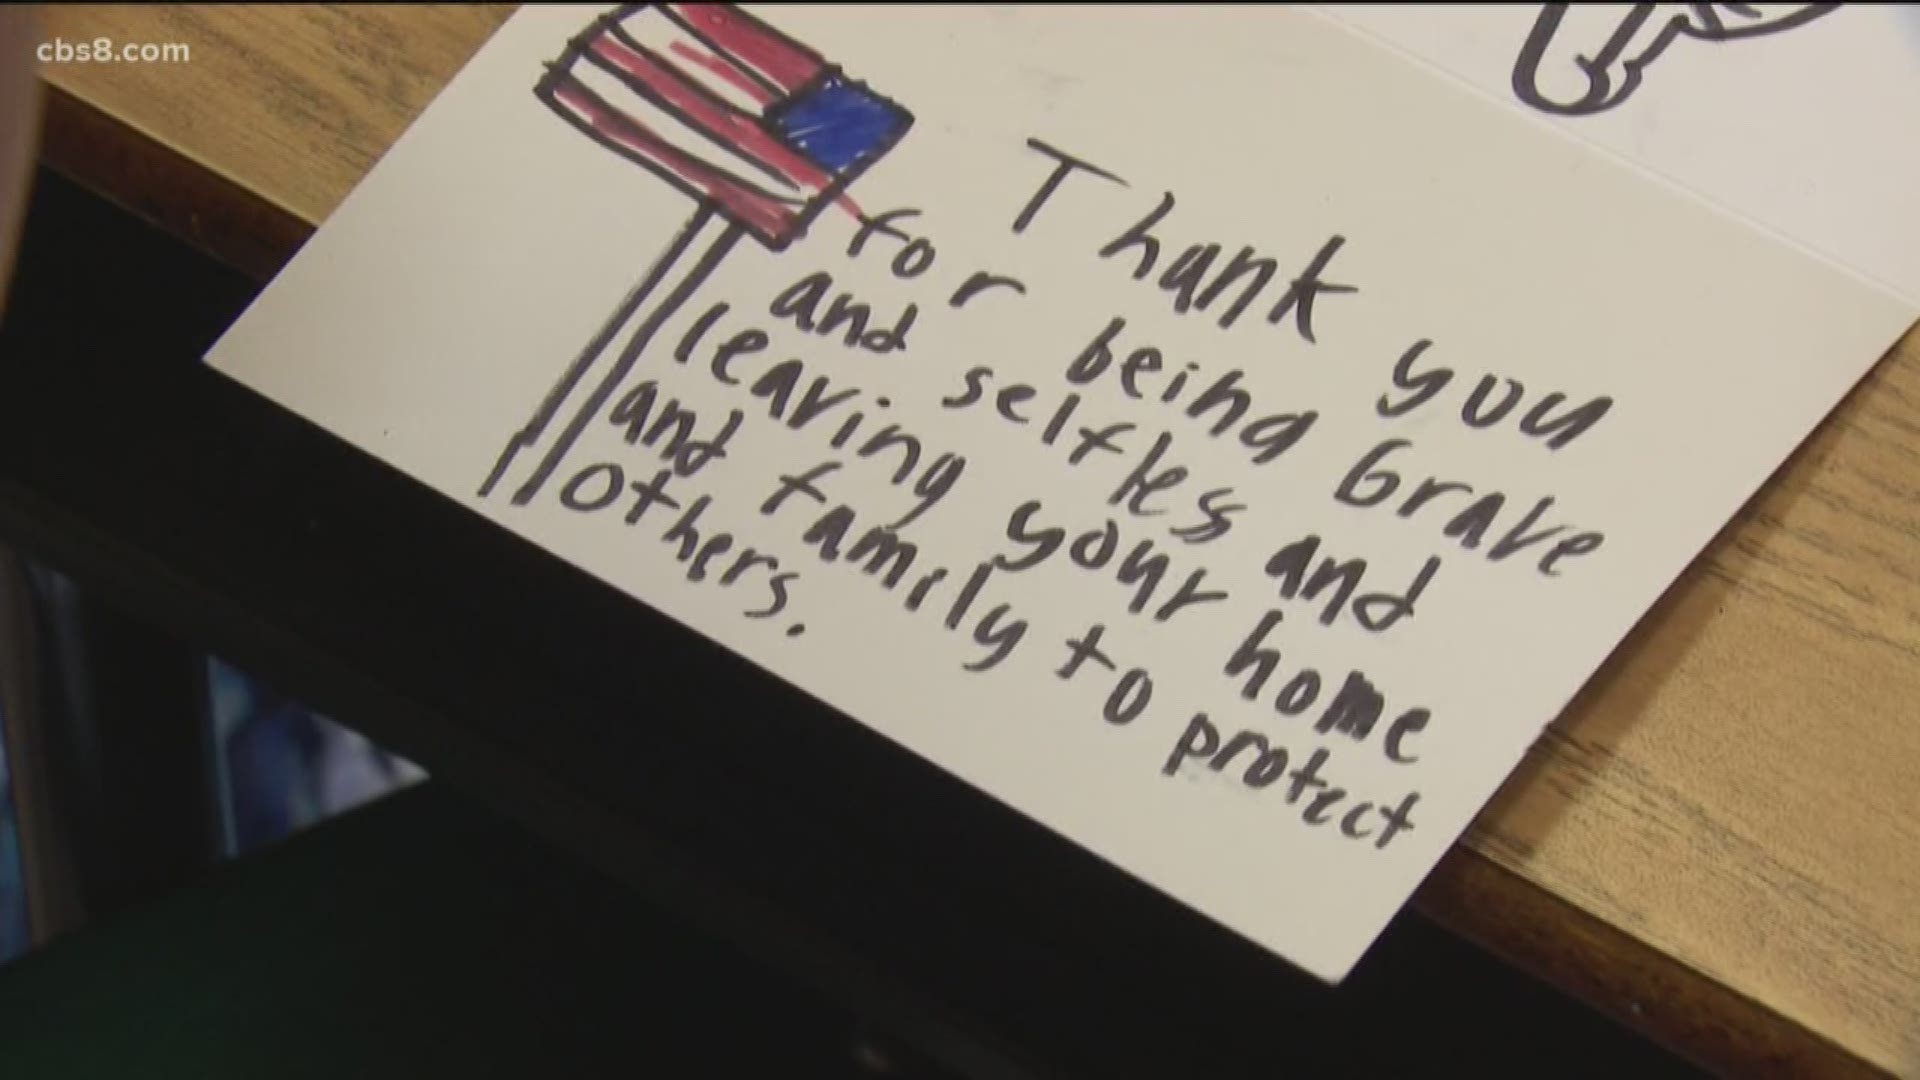 Nearly 165,000 cards will be sent to a fulfillment group which will then send the letters to service members.